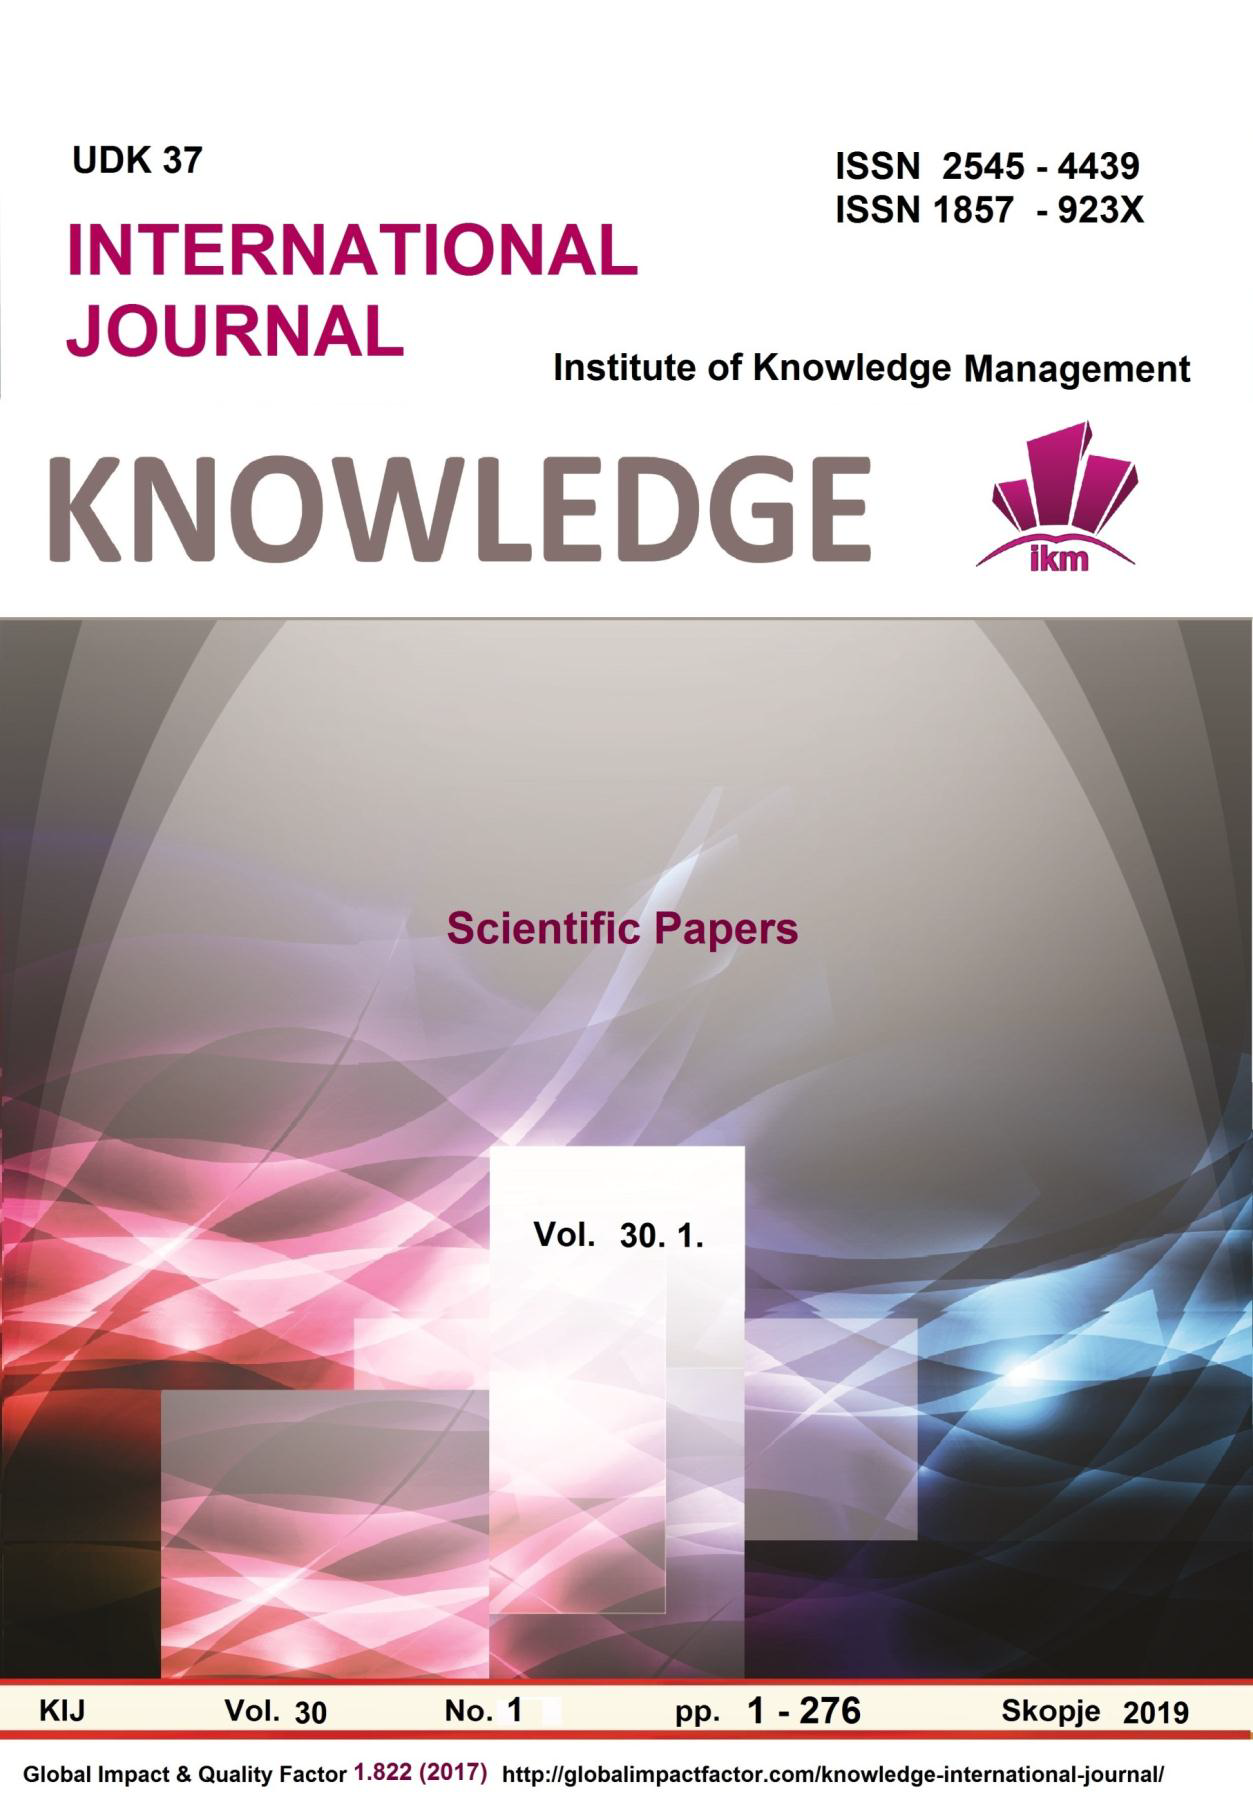 					View Vol. 30 No. 1 (2019): Knowledge without borders
				